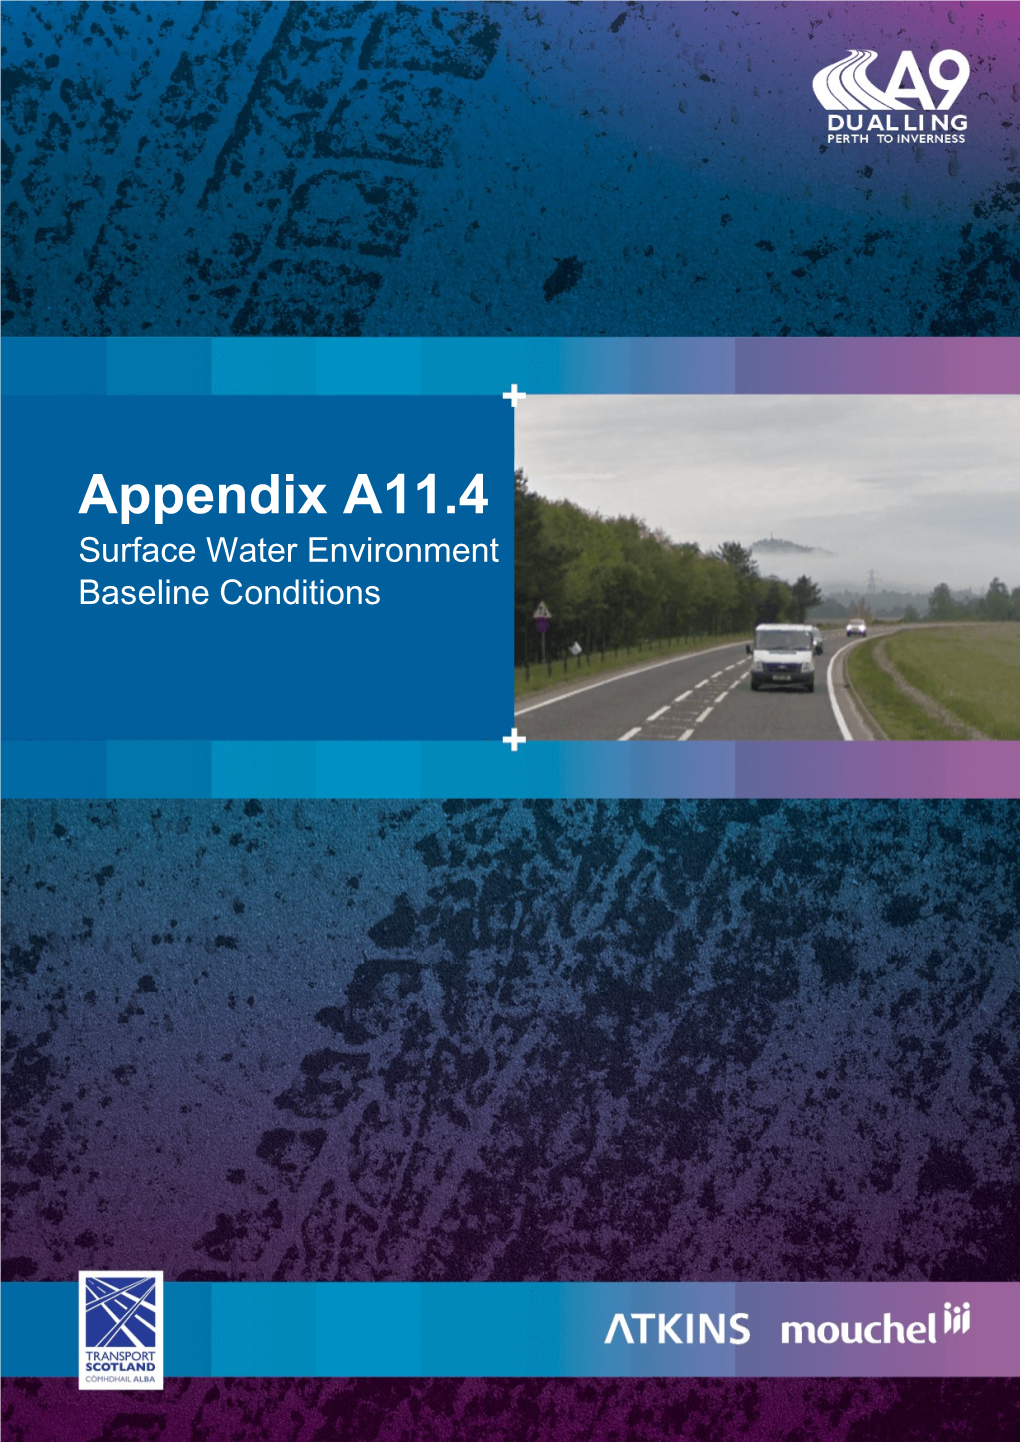 View Appendix A11.4 Surface Water Environment